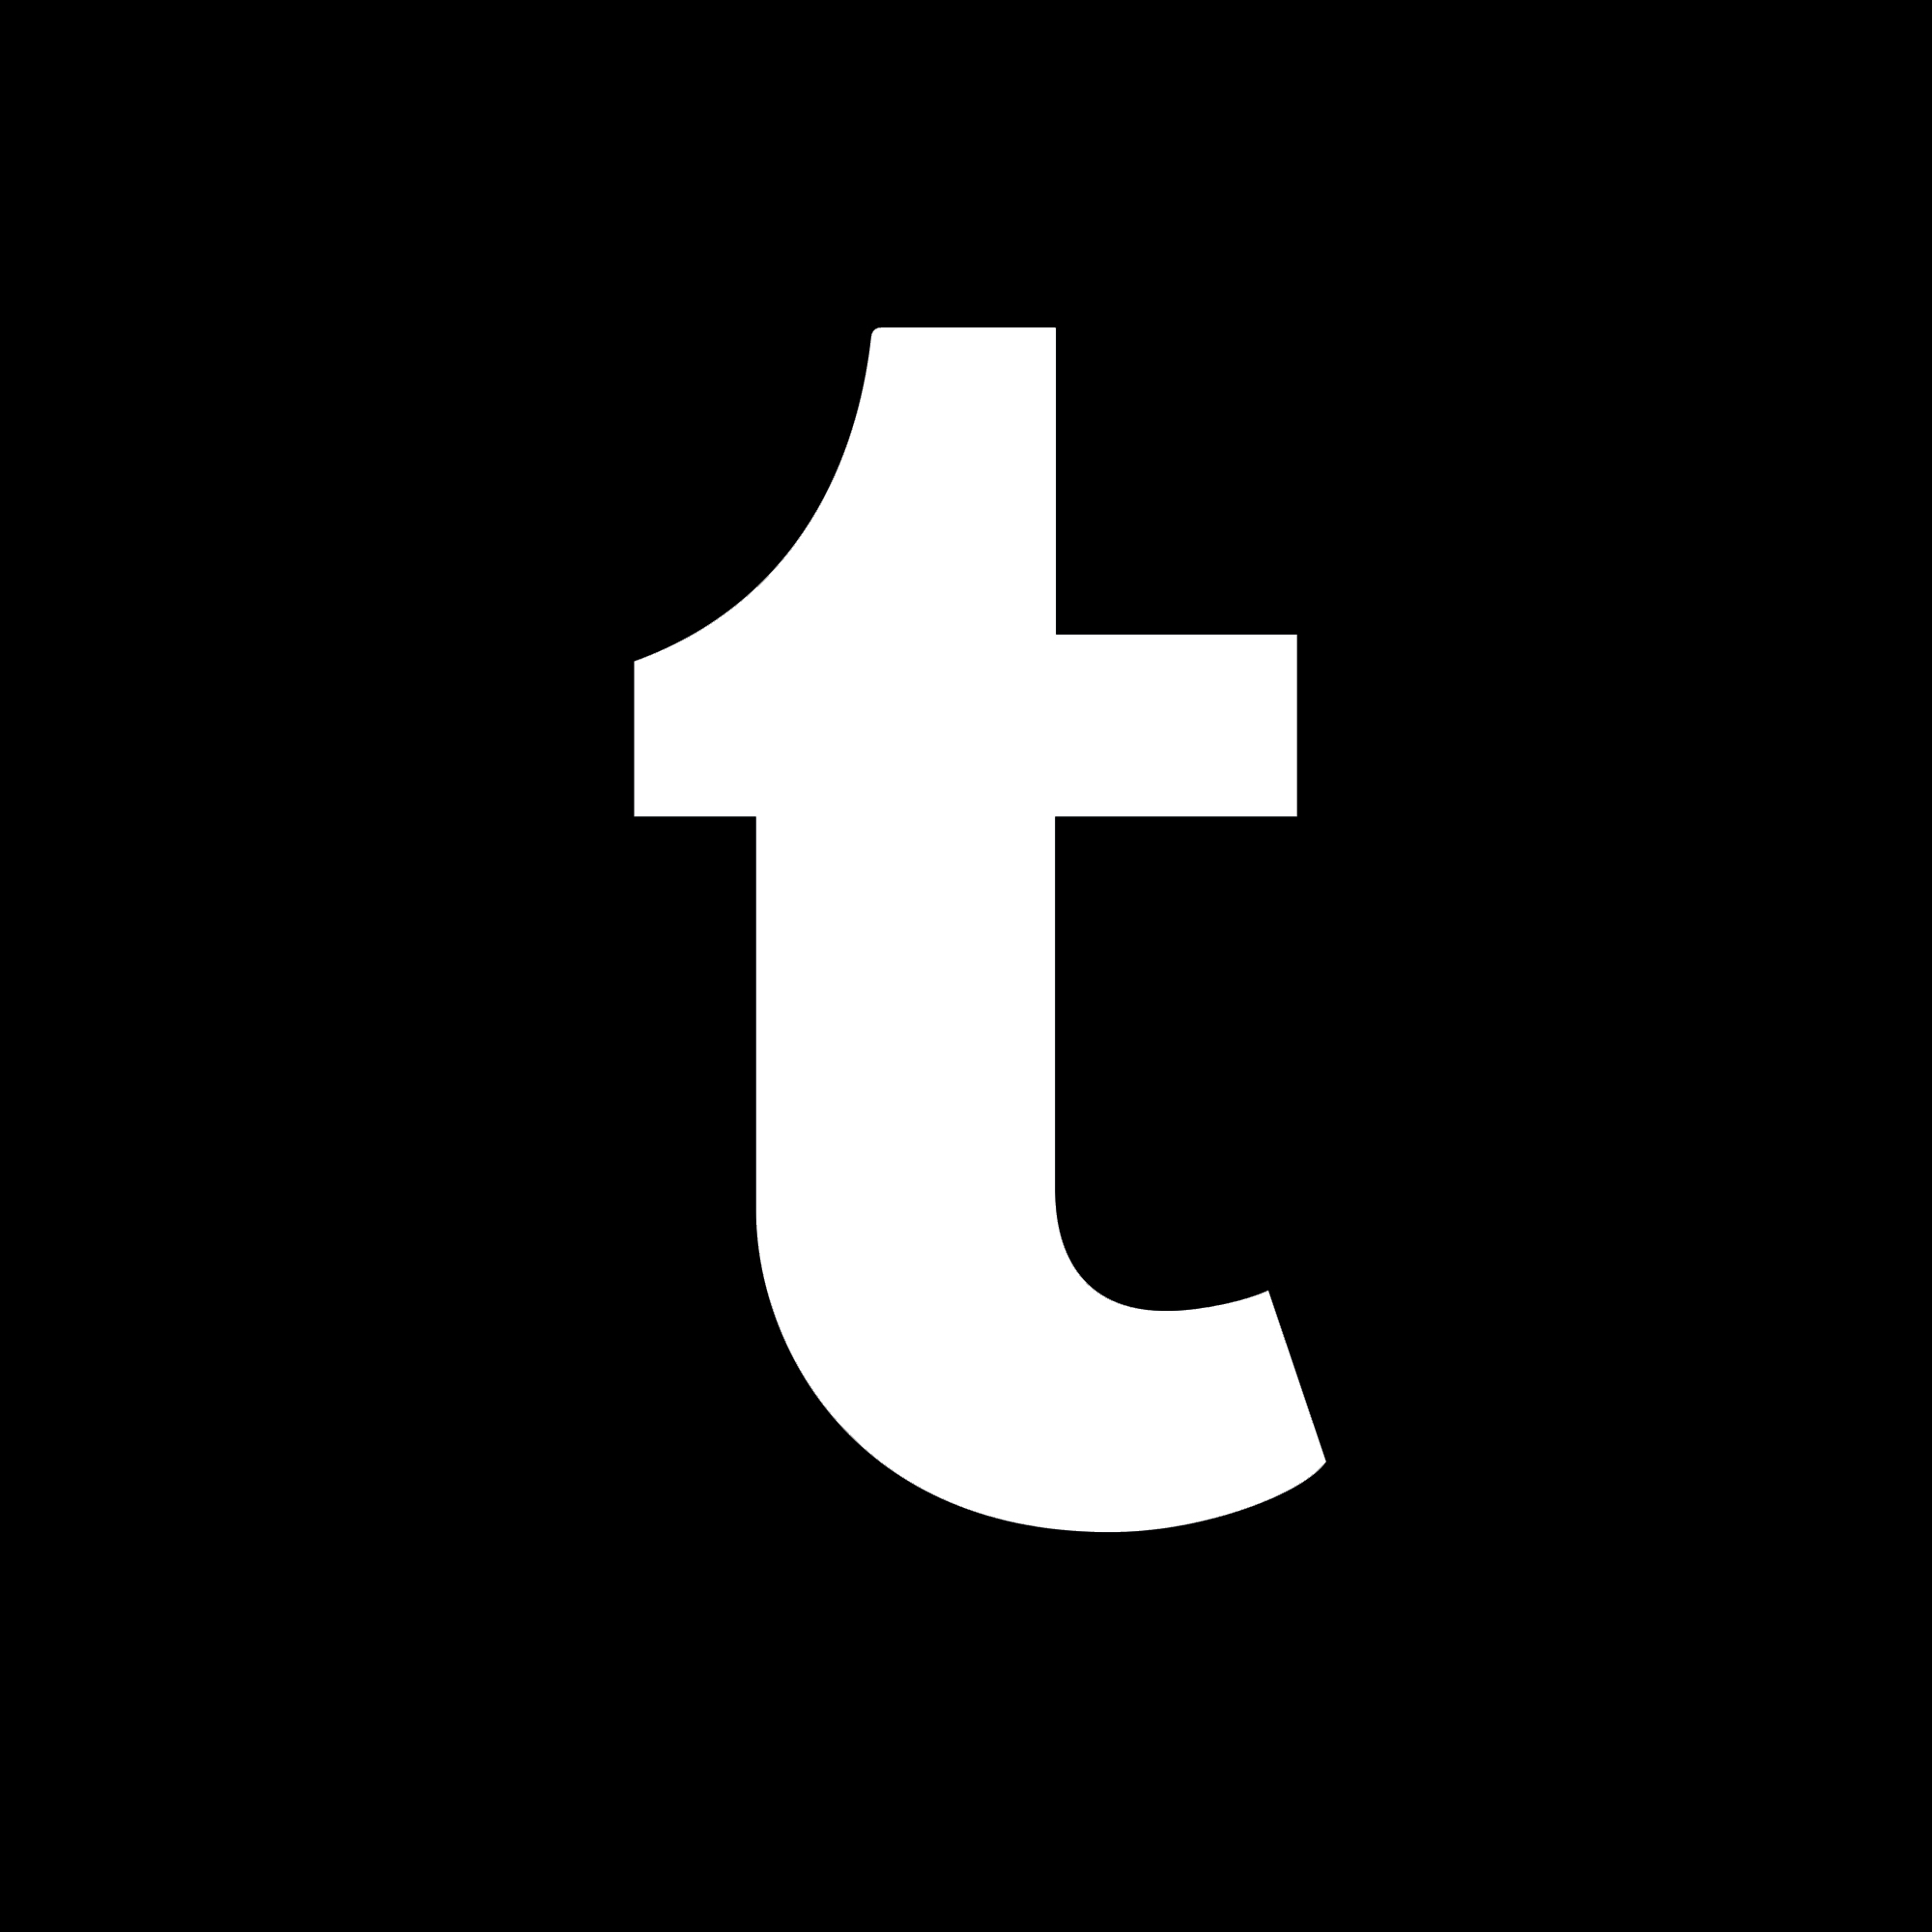 Meaning Tumblr logo and symbol.